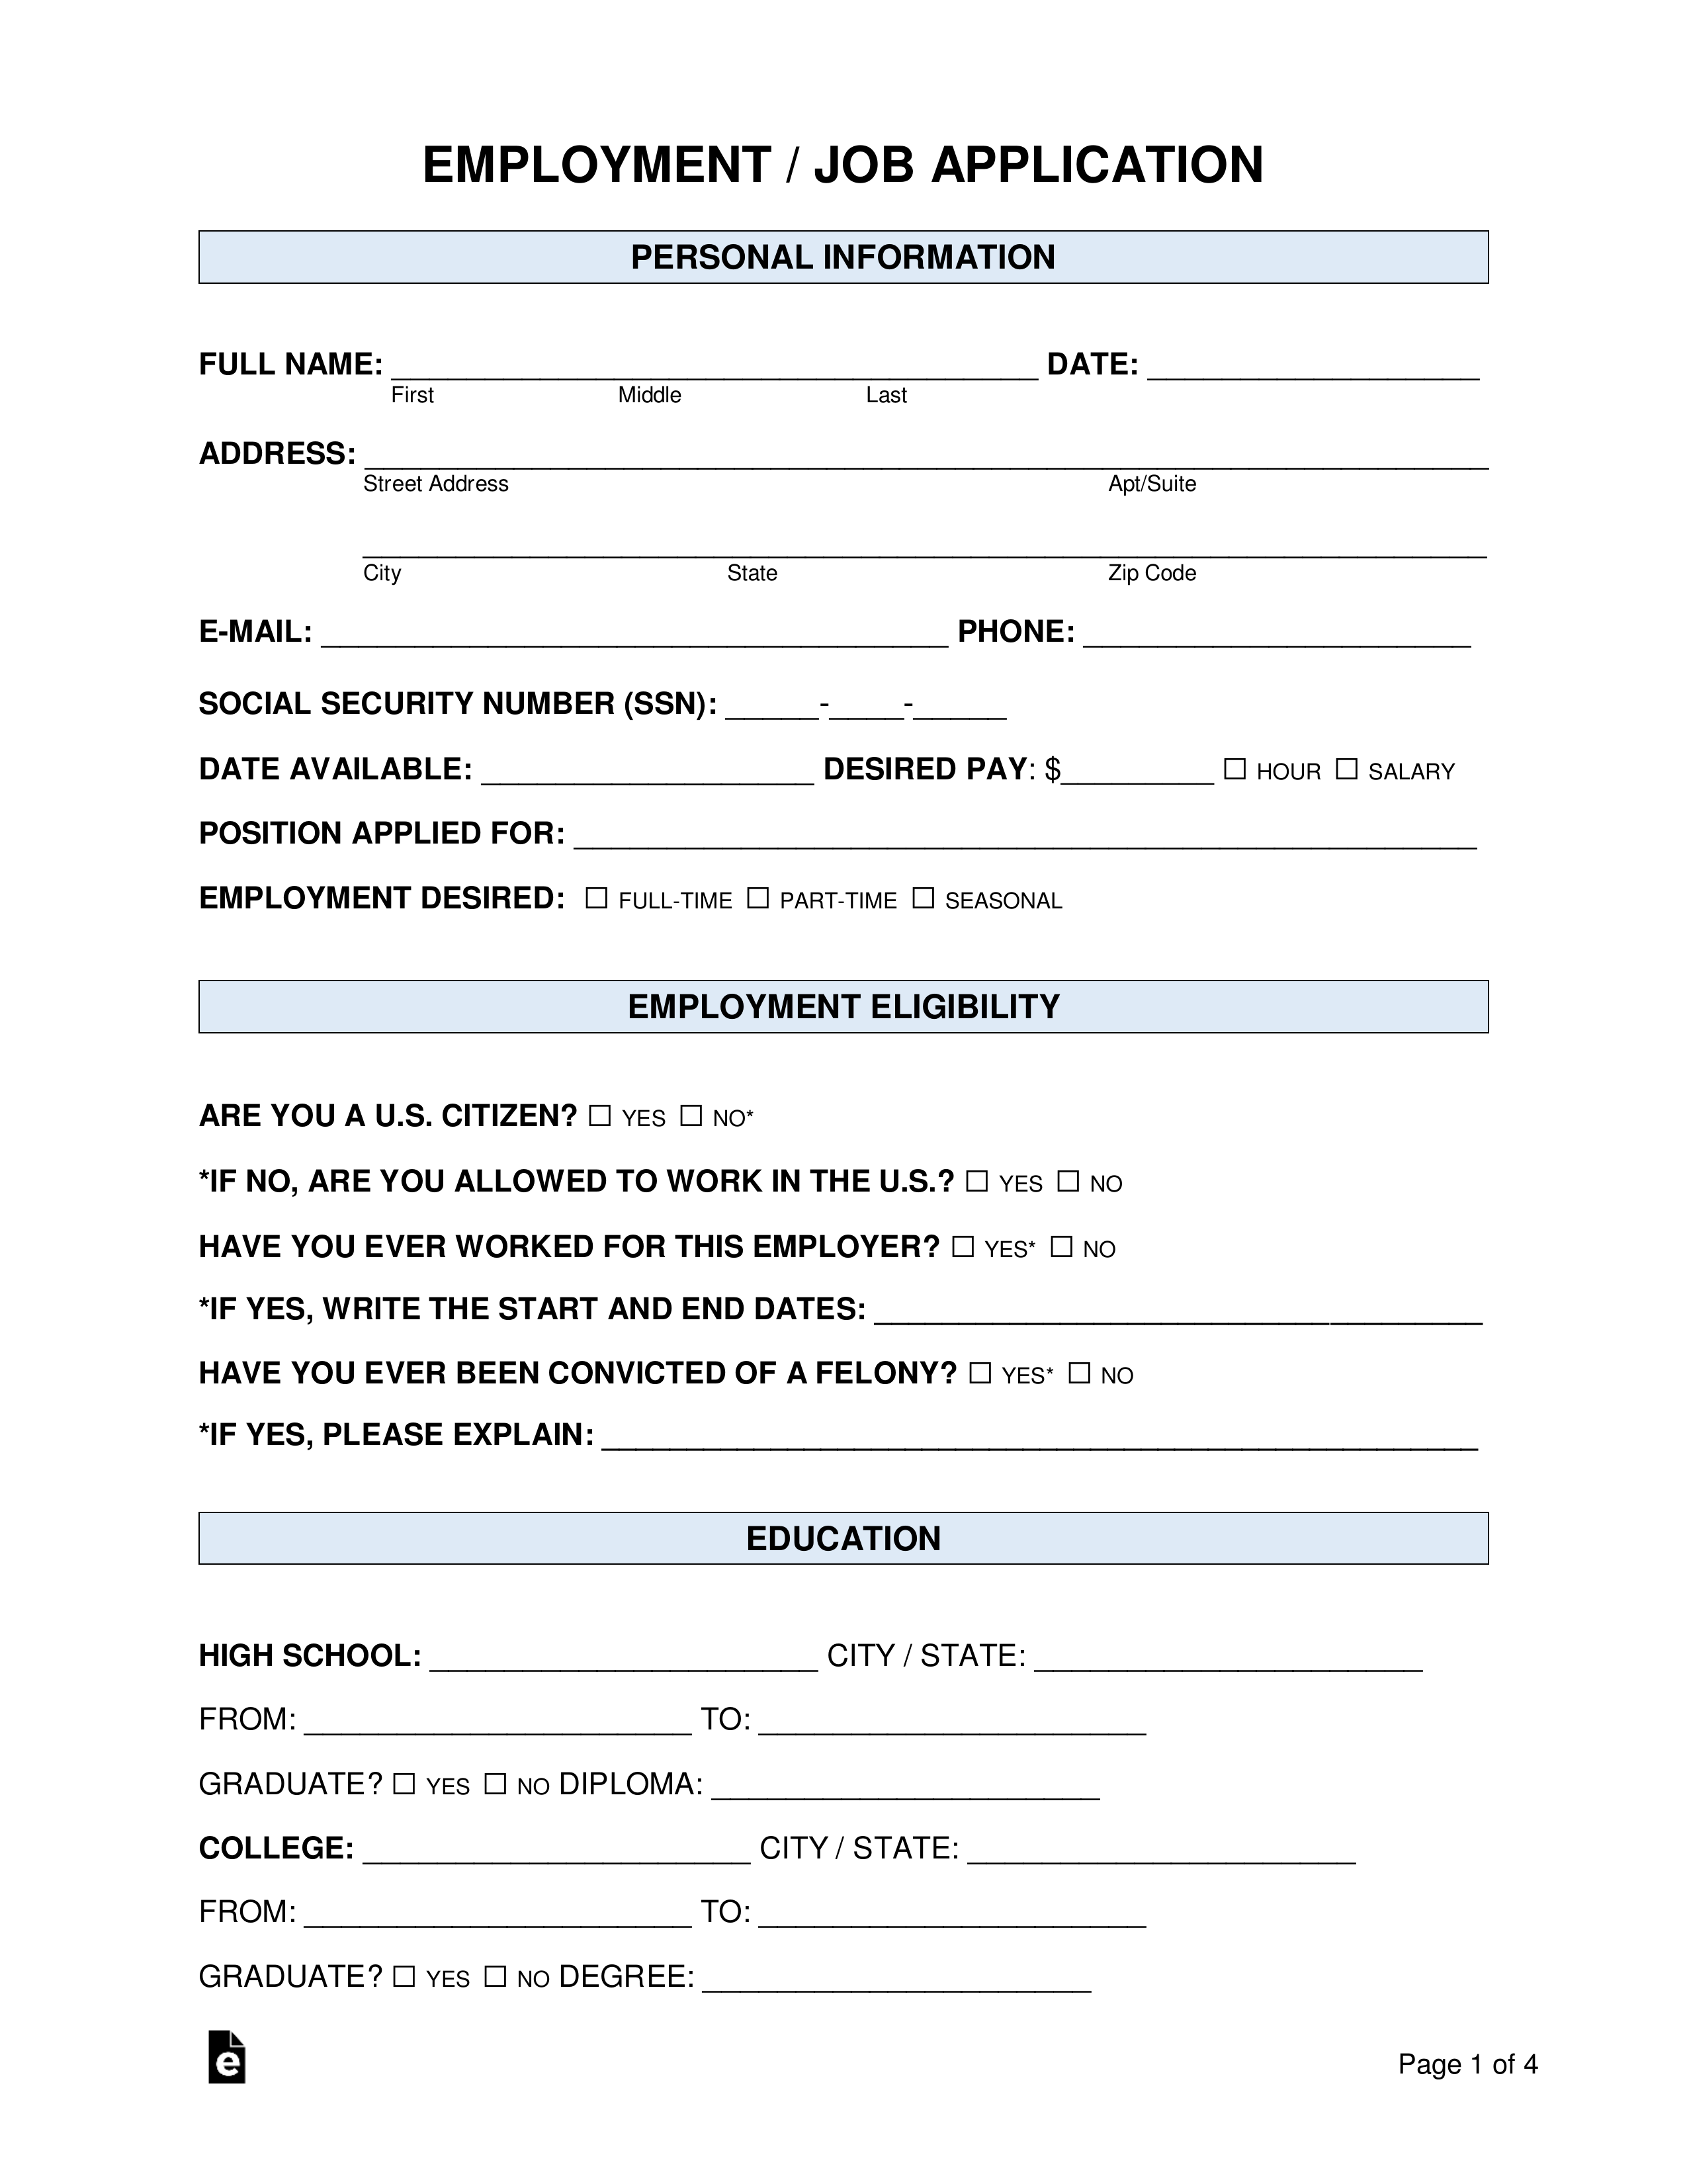 Job application form for employee